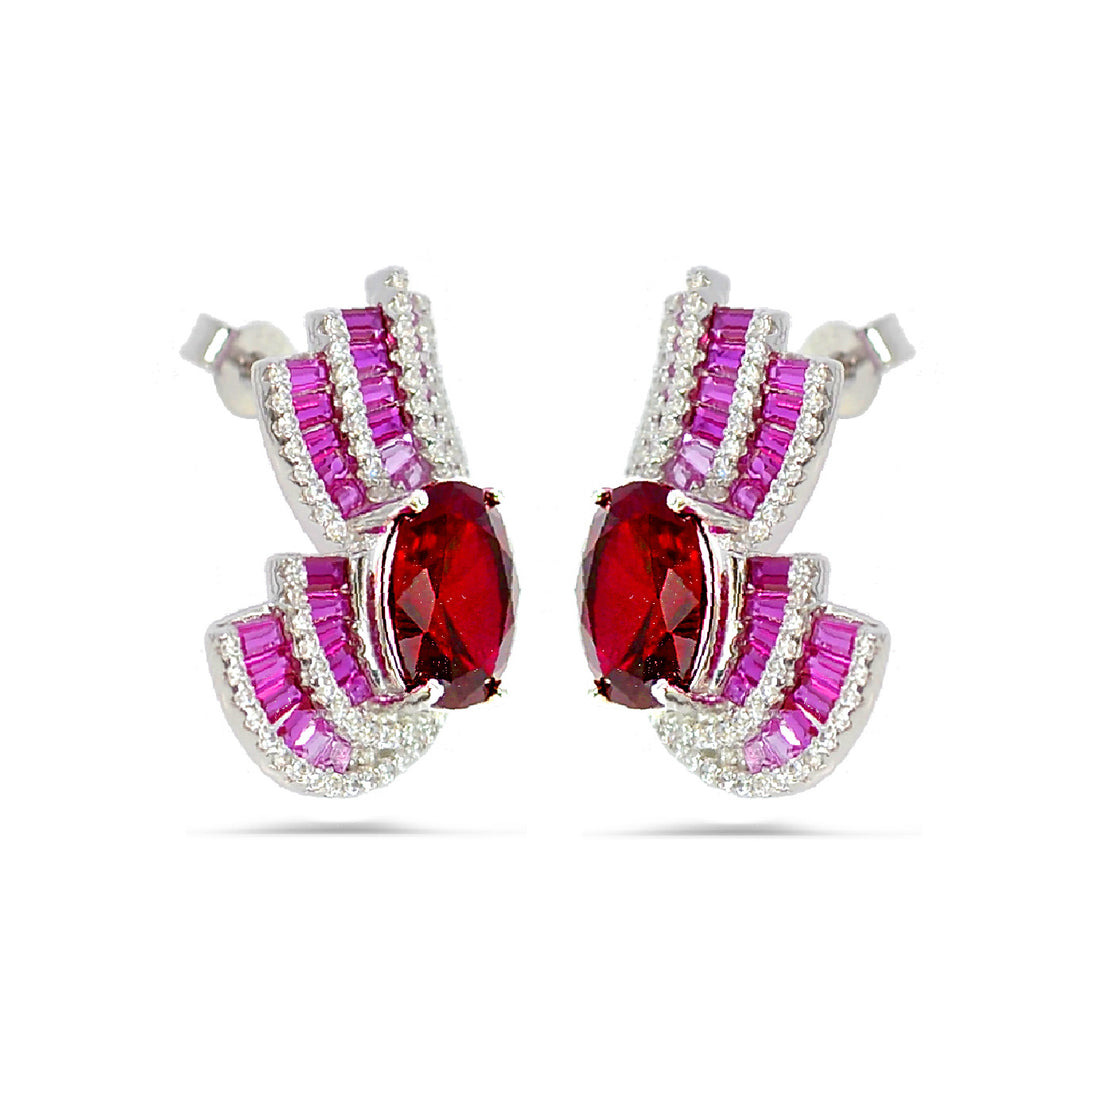 Stylish Sterling Silver 925 Earrings - With Red Stone & High-Quality Cubic Zircons